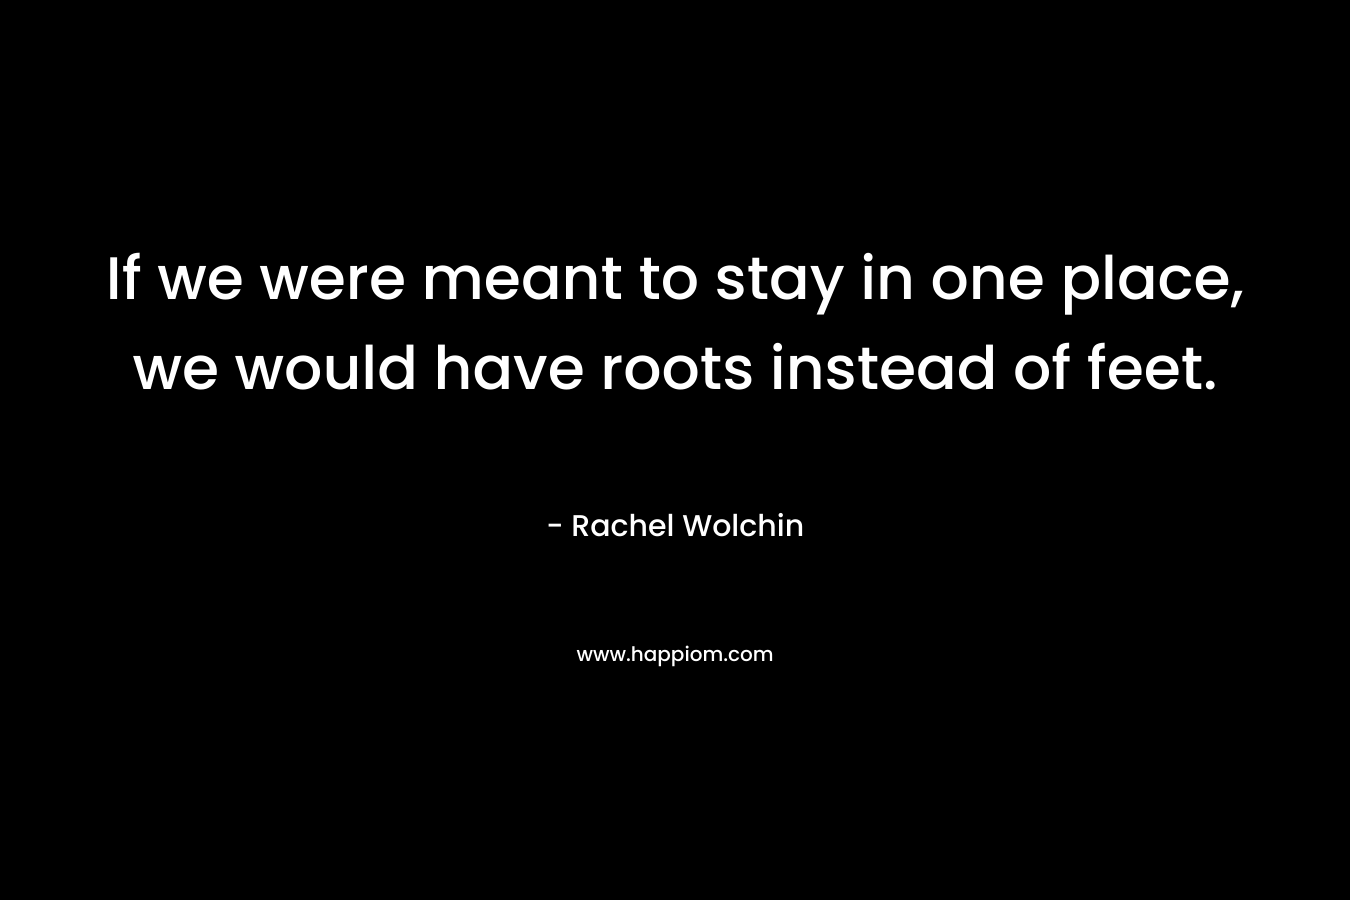 If we were meant to stay in one place, we would have roots instead of feet. – Rachel Wolchin